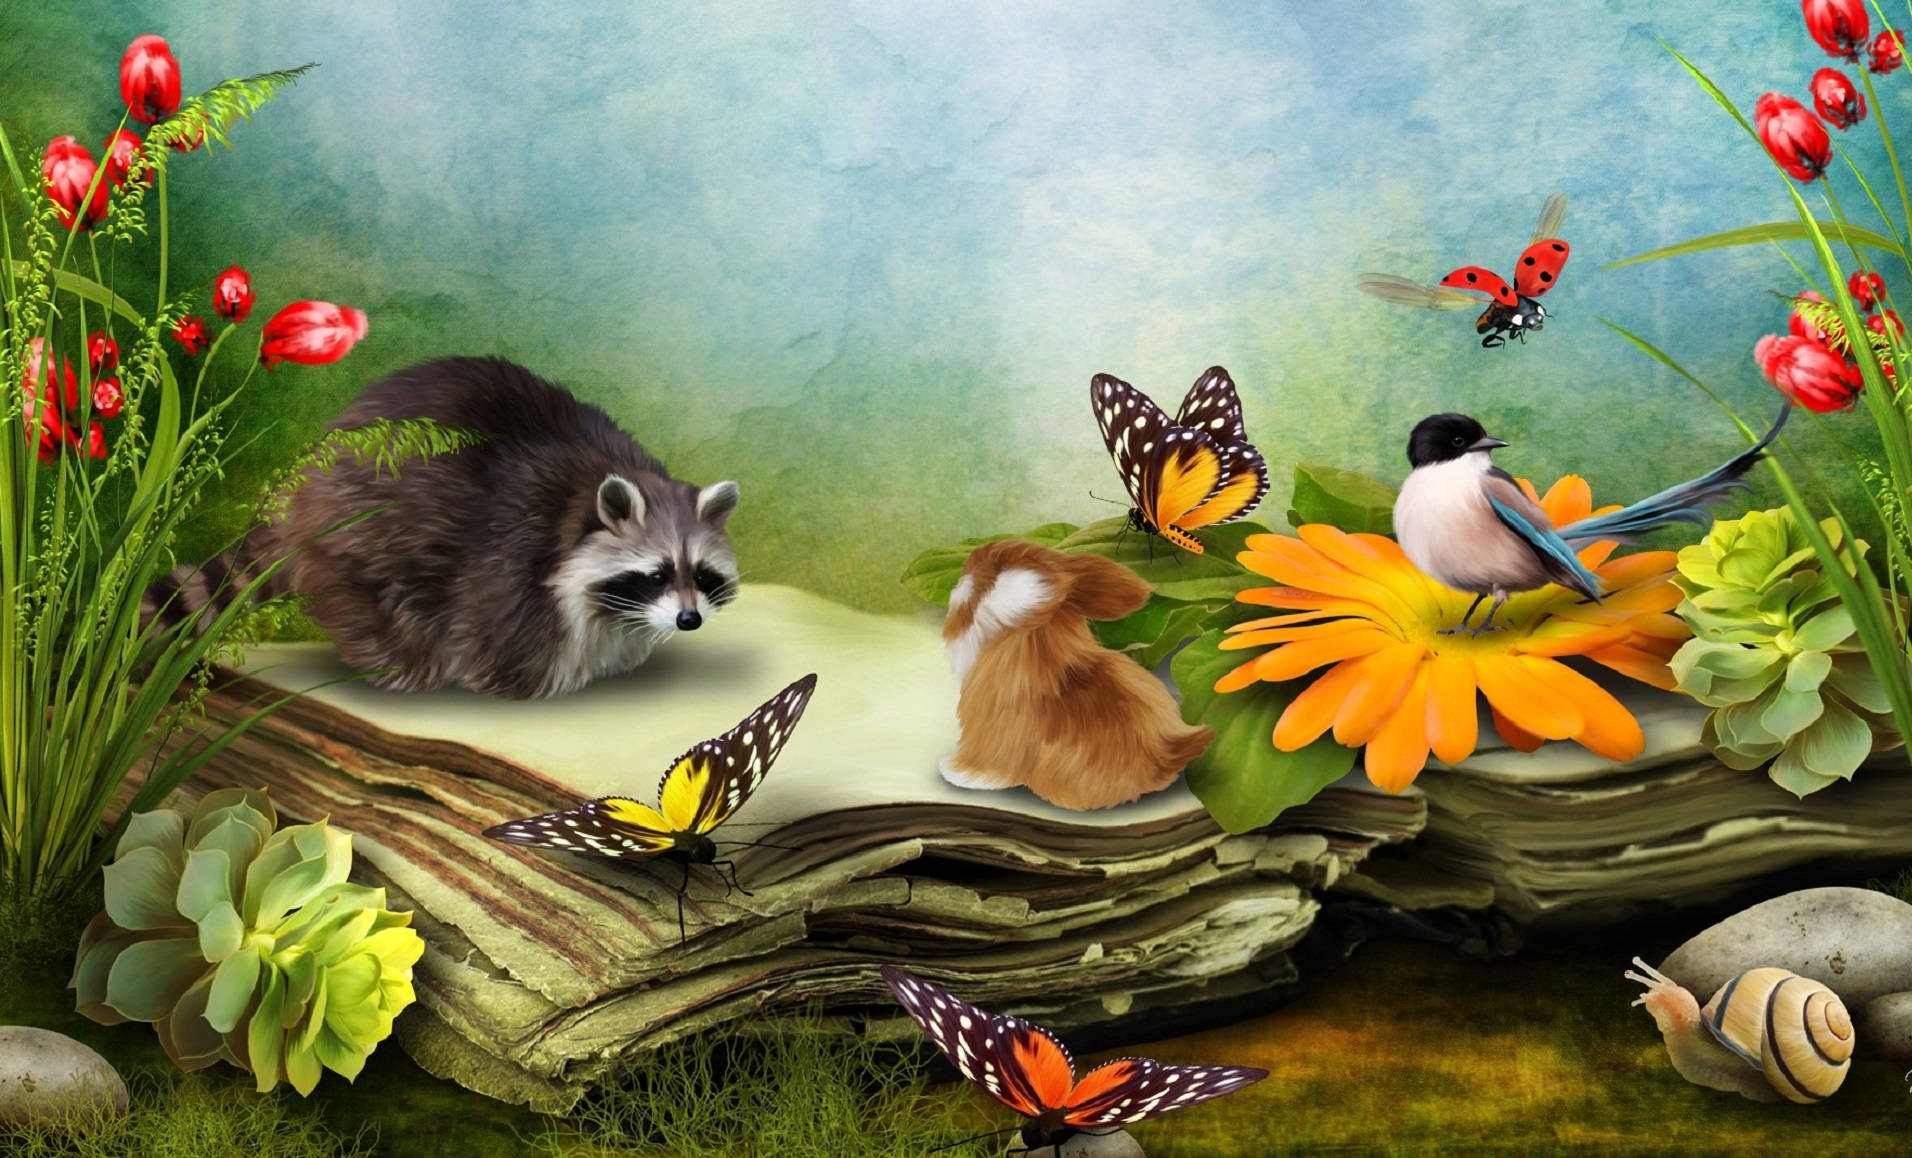 Whimsical Animals Over A Book Background